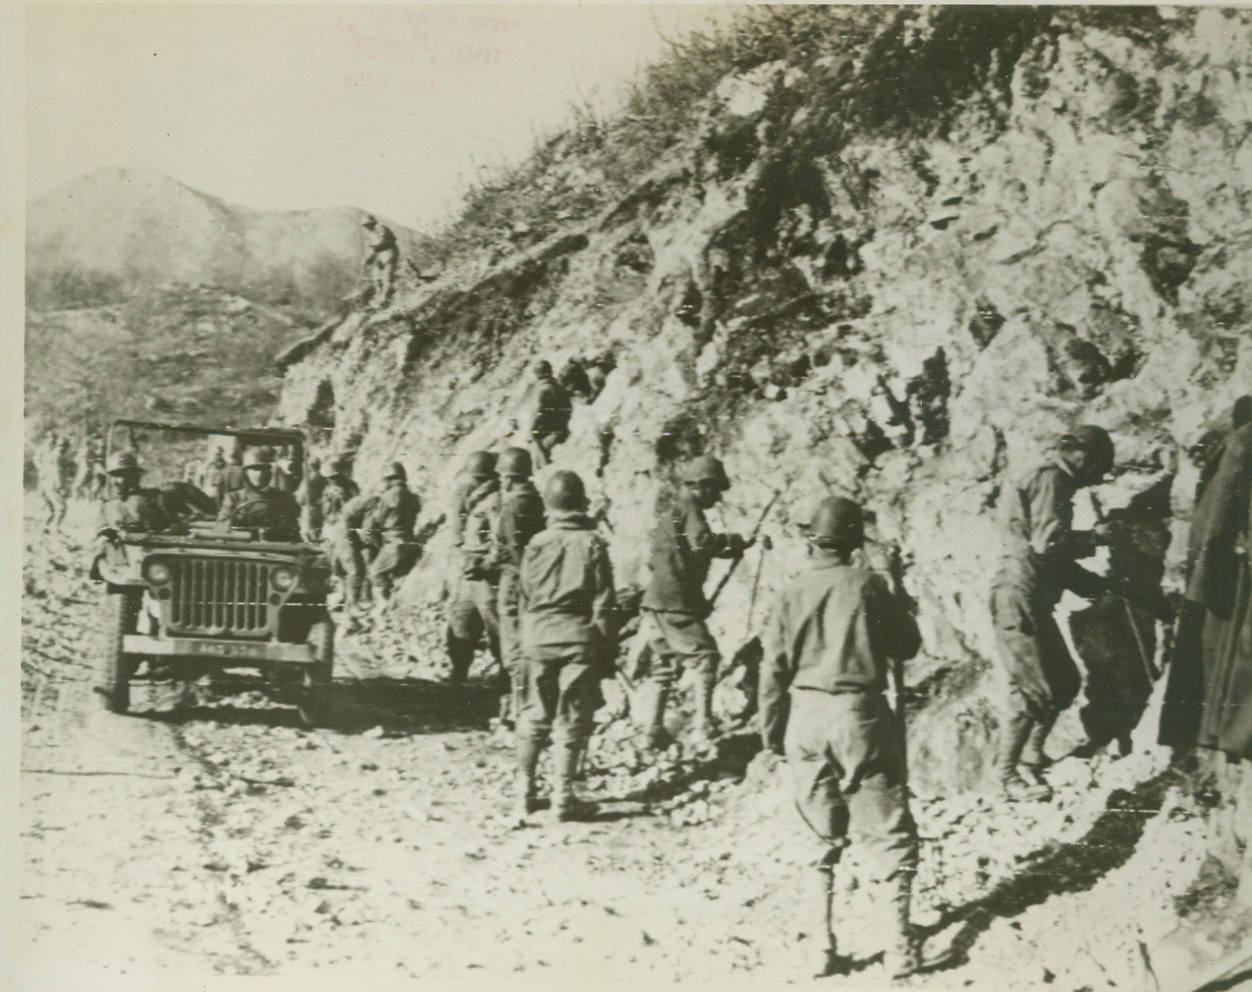 French Engineers Repair Road, 1/20/1944. Italy – French Army Engineers of the Allied 5th Army, clear dirt and debris from a road in Italy bombed by the Germans in an attempt to block the Allied advance. Today, it was announced that 5th Army troops had captured the important communications center of Minturno, North of the Garigliano River.  Credit: (ACME photo via Army Radiotelephoto);